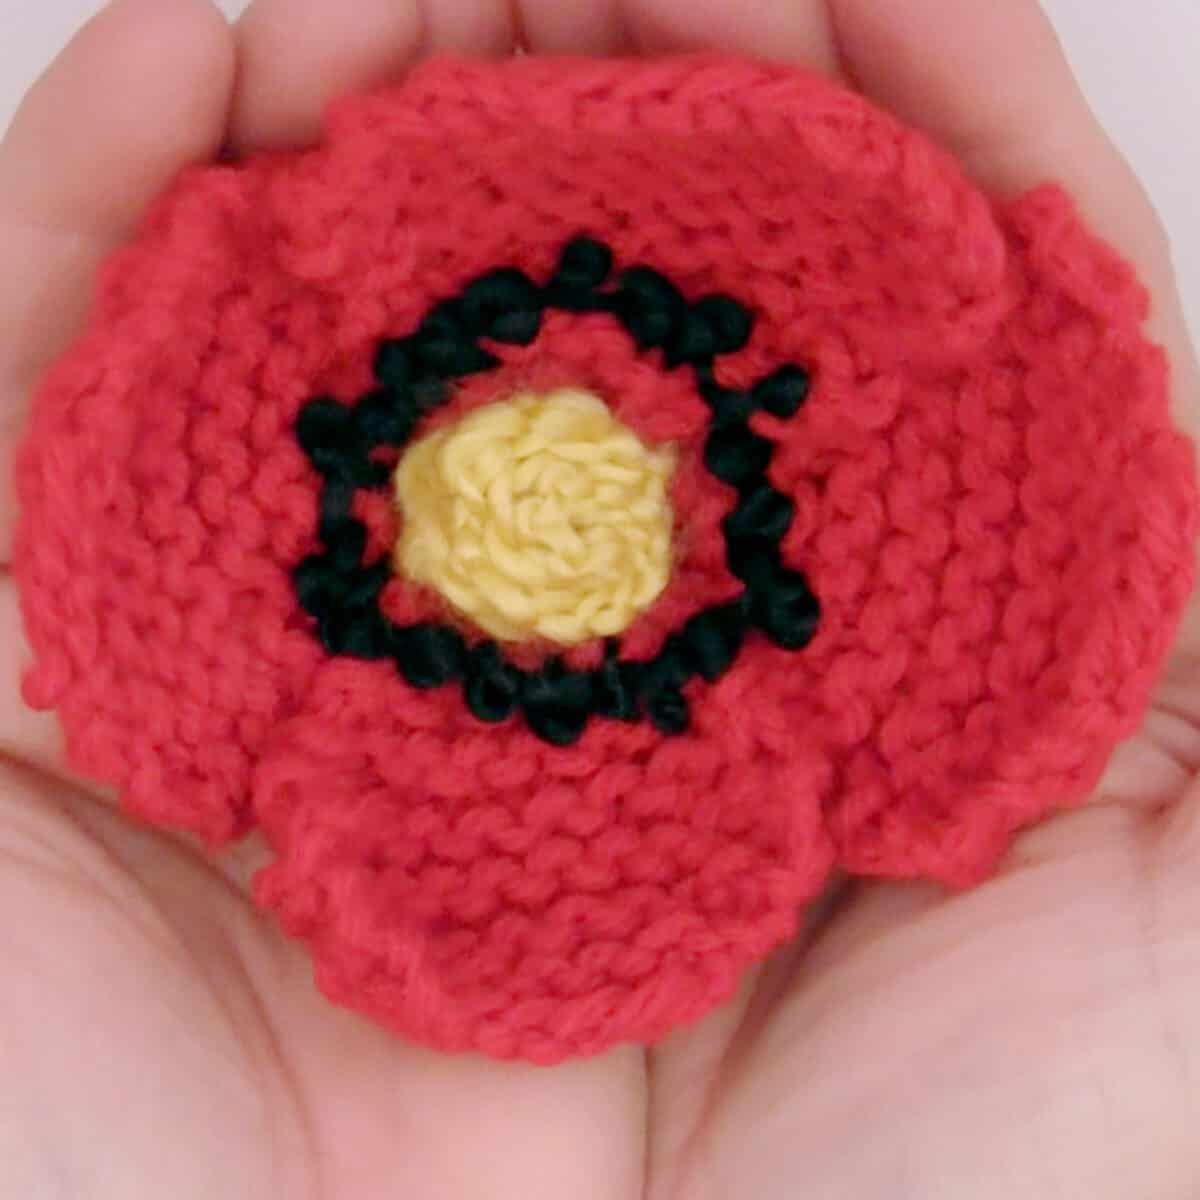 Knitted Poppy Flower in red color yarn held by two hands.